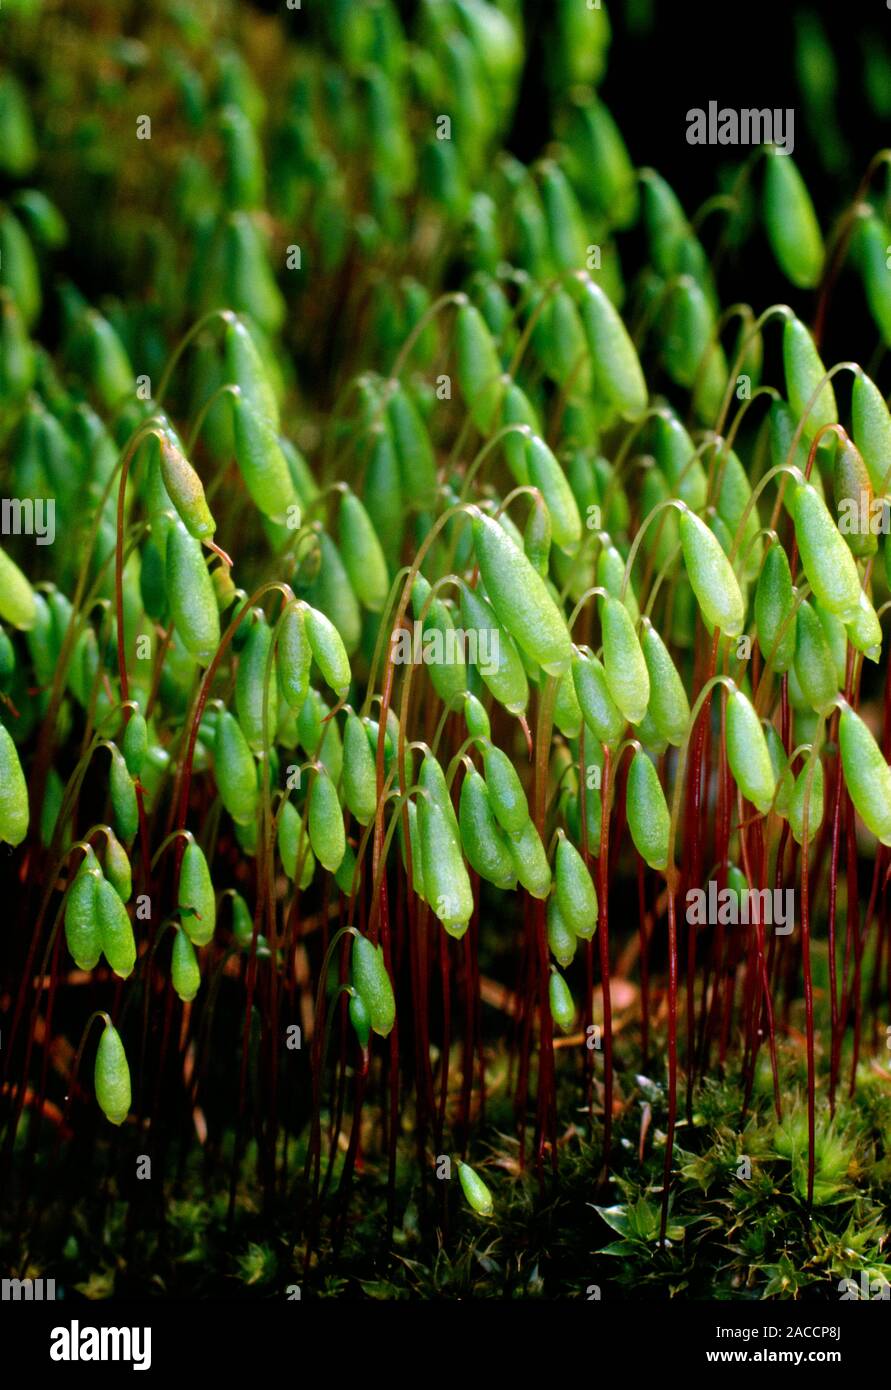 Spore capsules of the moss Bryum capillare, a common species found growing on rocks, walls and trees throughtout Europe. The plants grow to 1-5cm tall Stock Photo